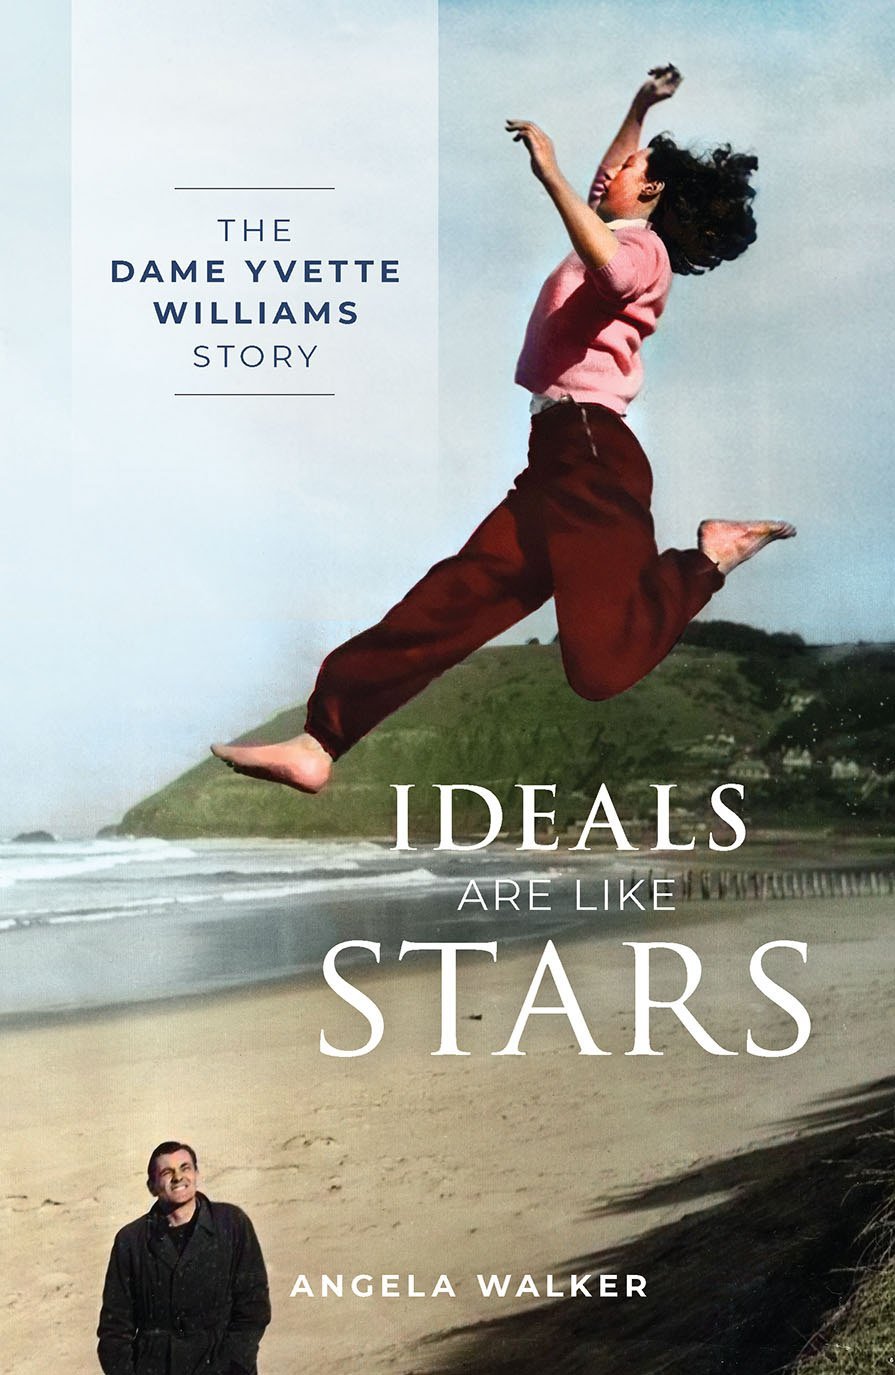 Ideals are like Stars: The Dame Yvette Williams Story, by Angela Walker, published by Bateman...